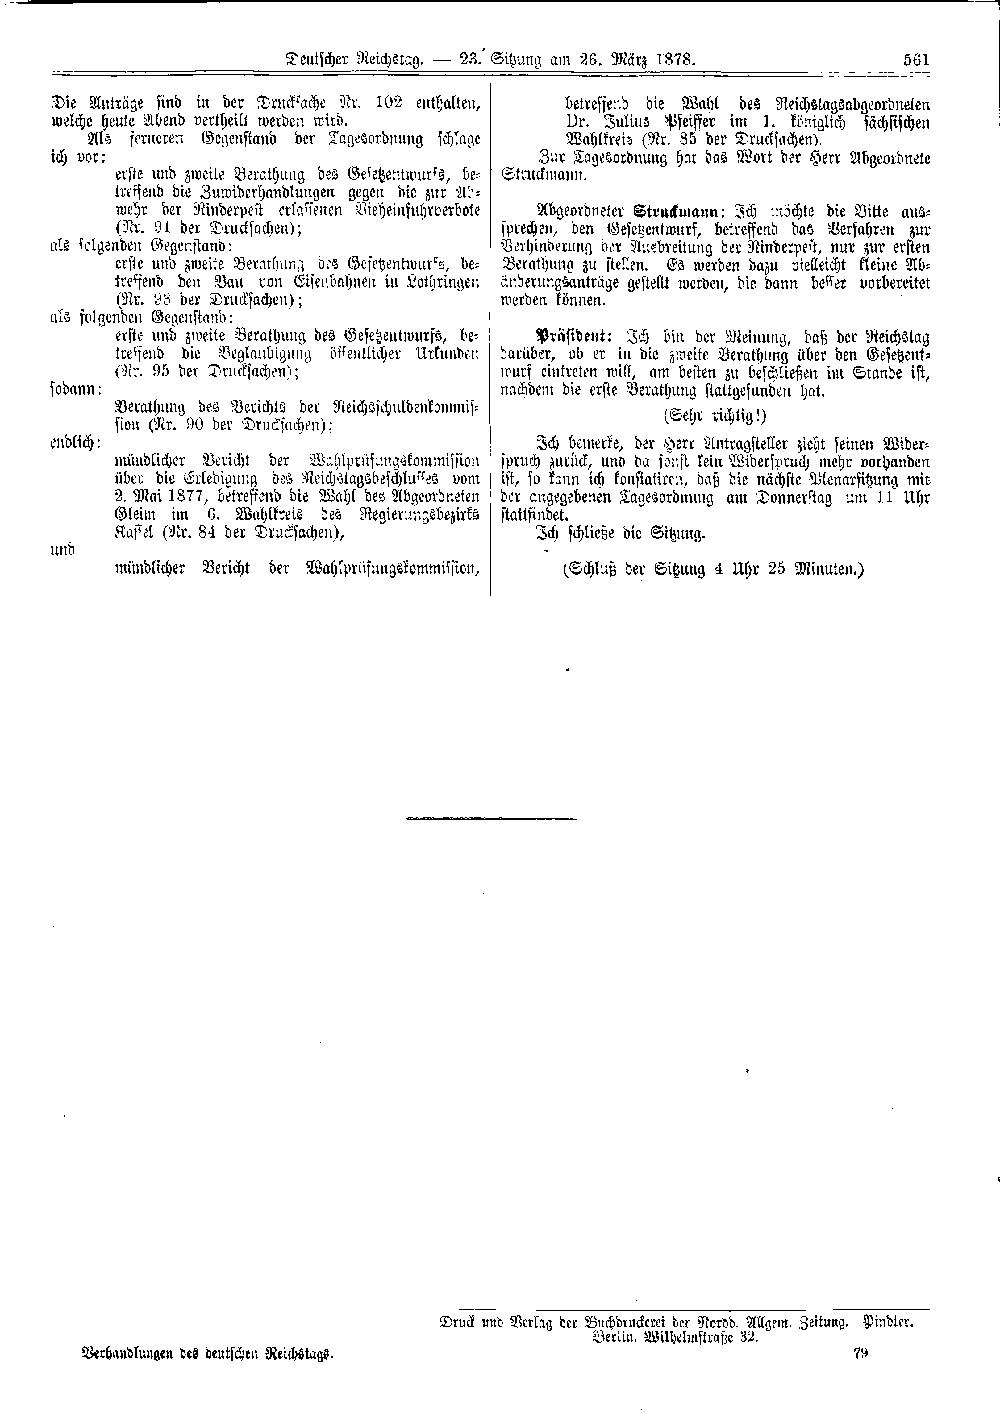 Scan of page 561